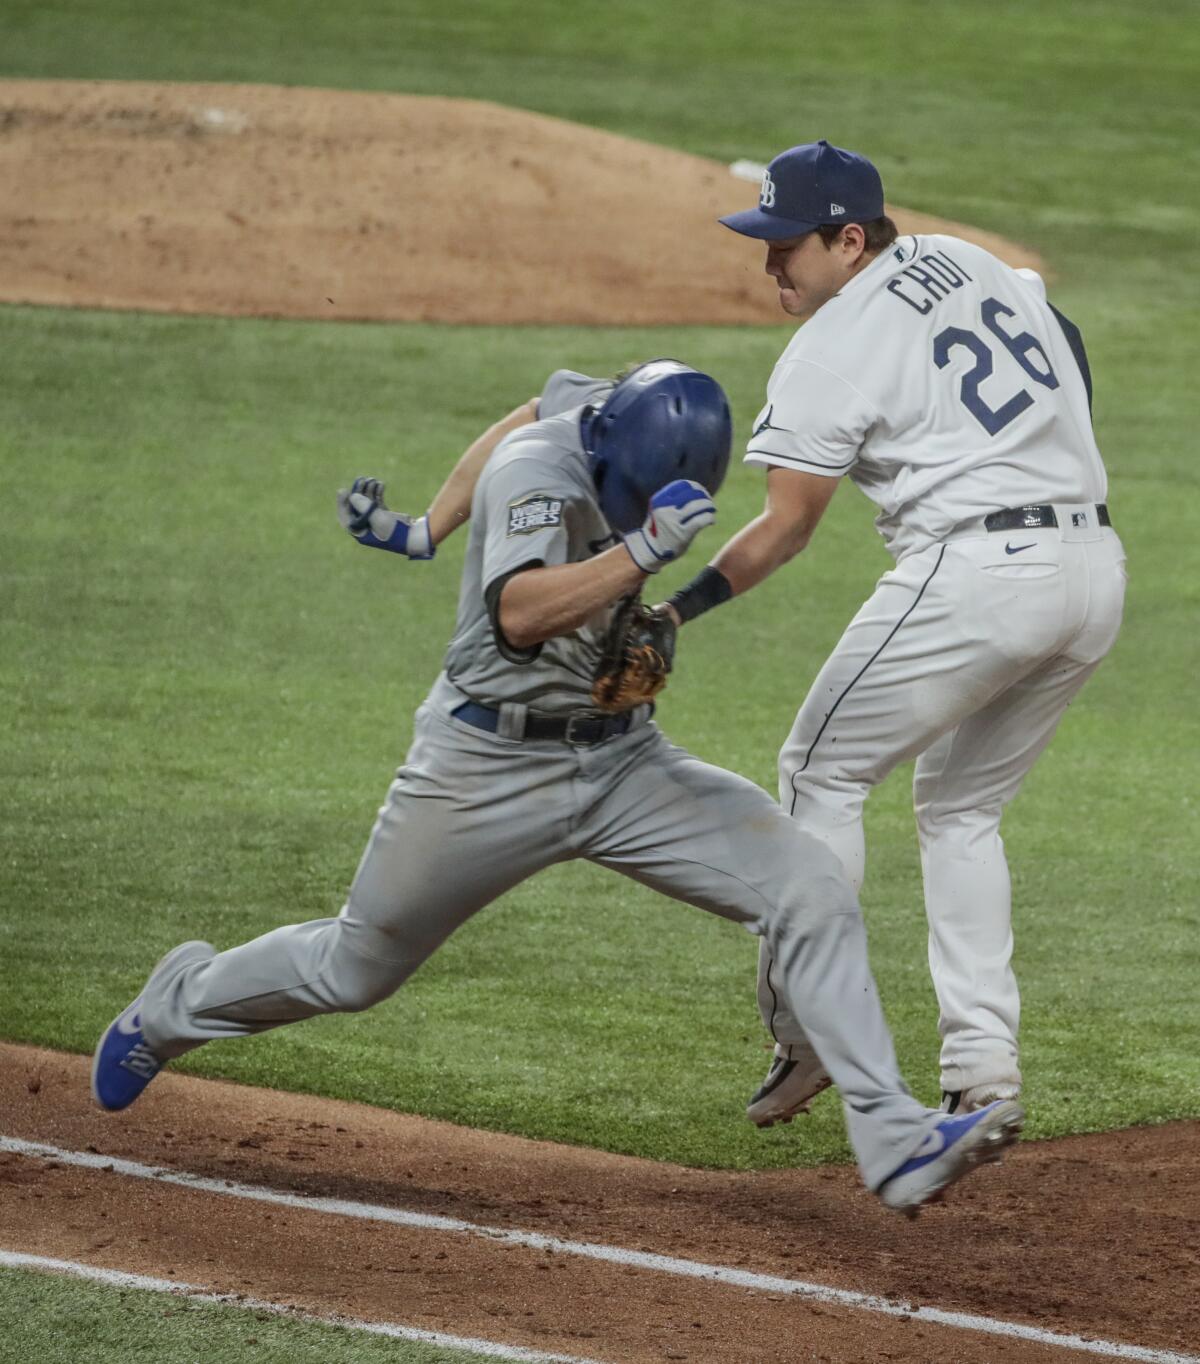 Corey Seager is tagged out by Rays first baseman Ji-Man Choi.